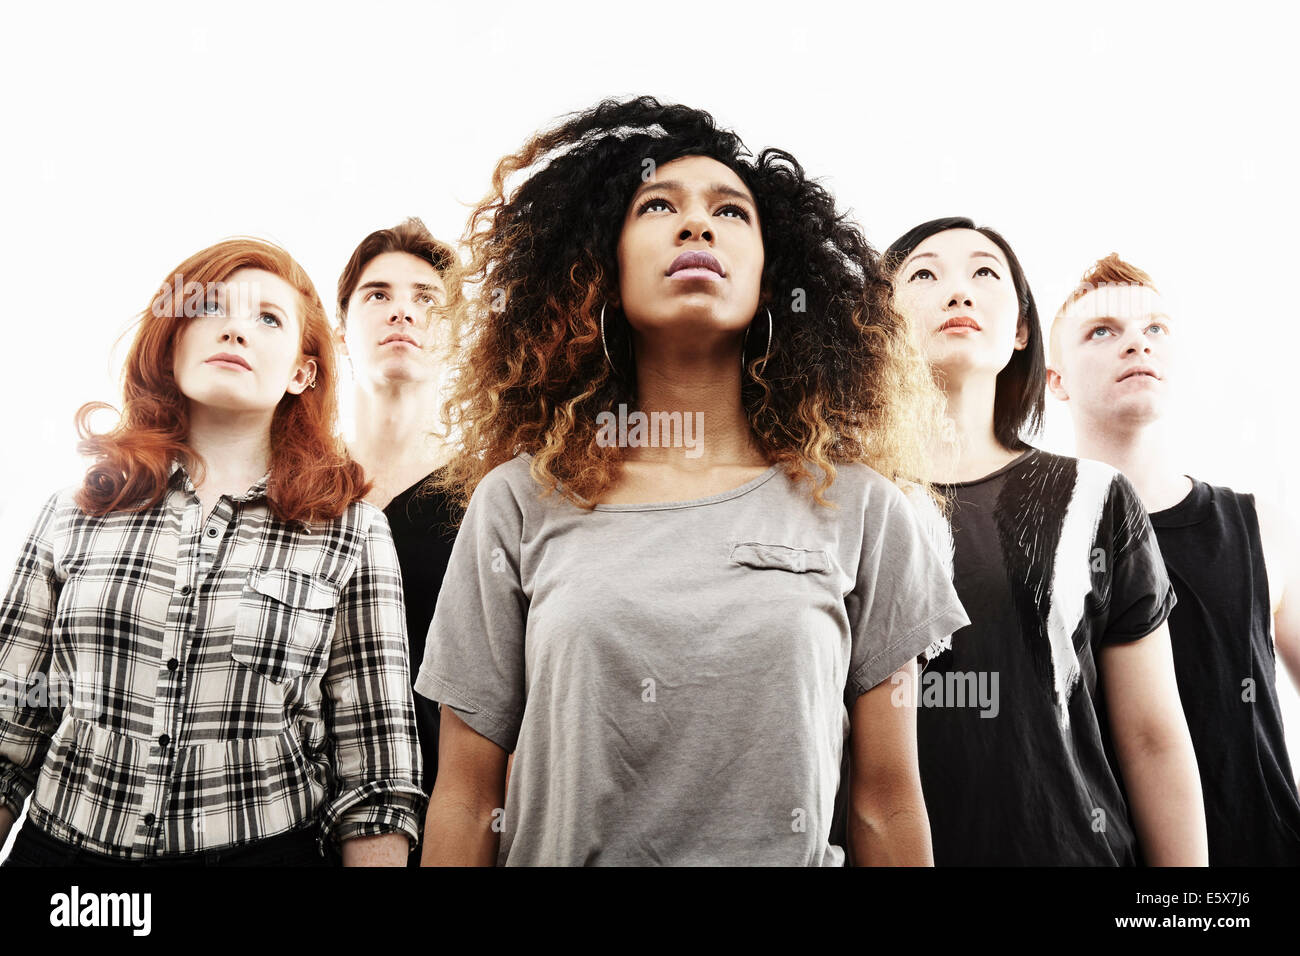 Low angle studio portrait of five young adults looking upward Stock Photo